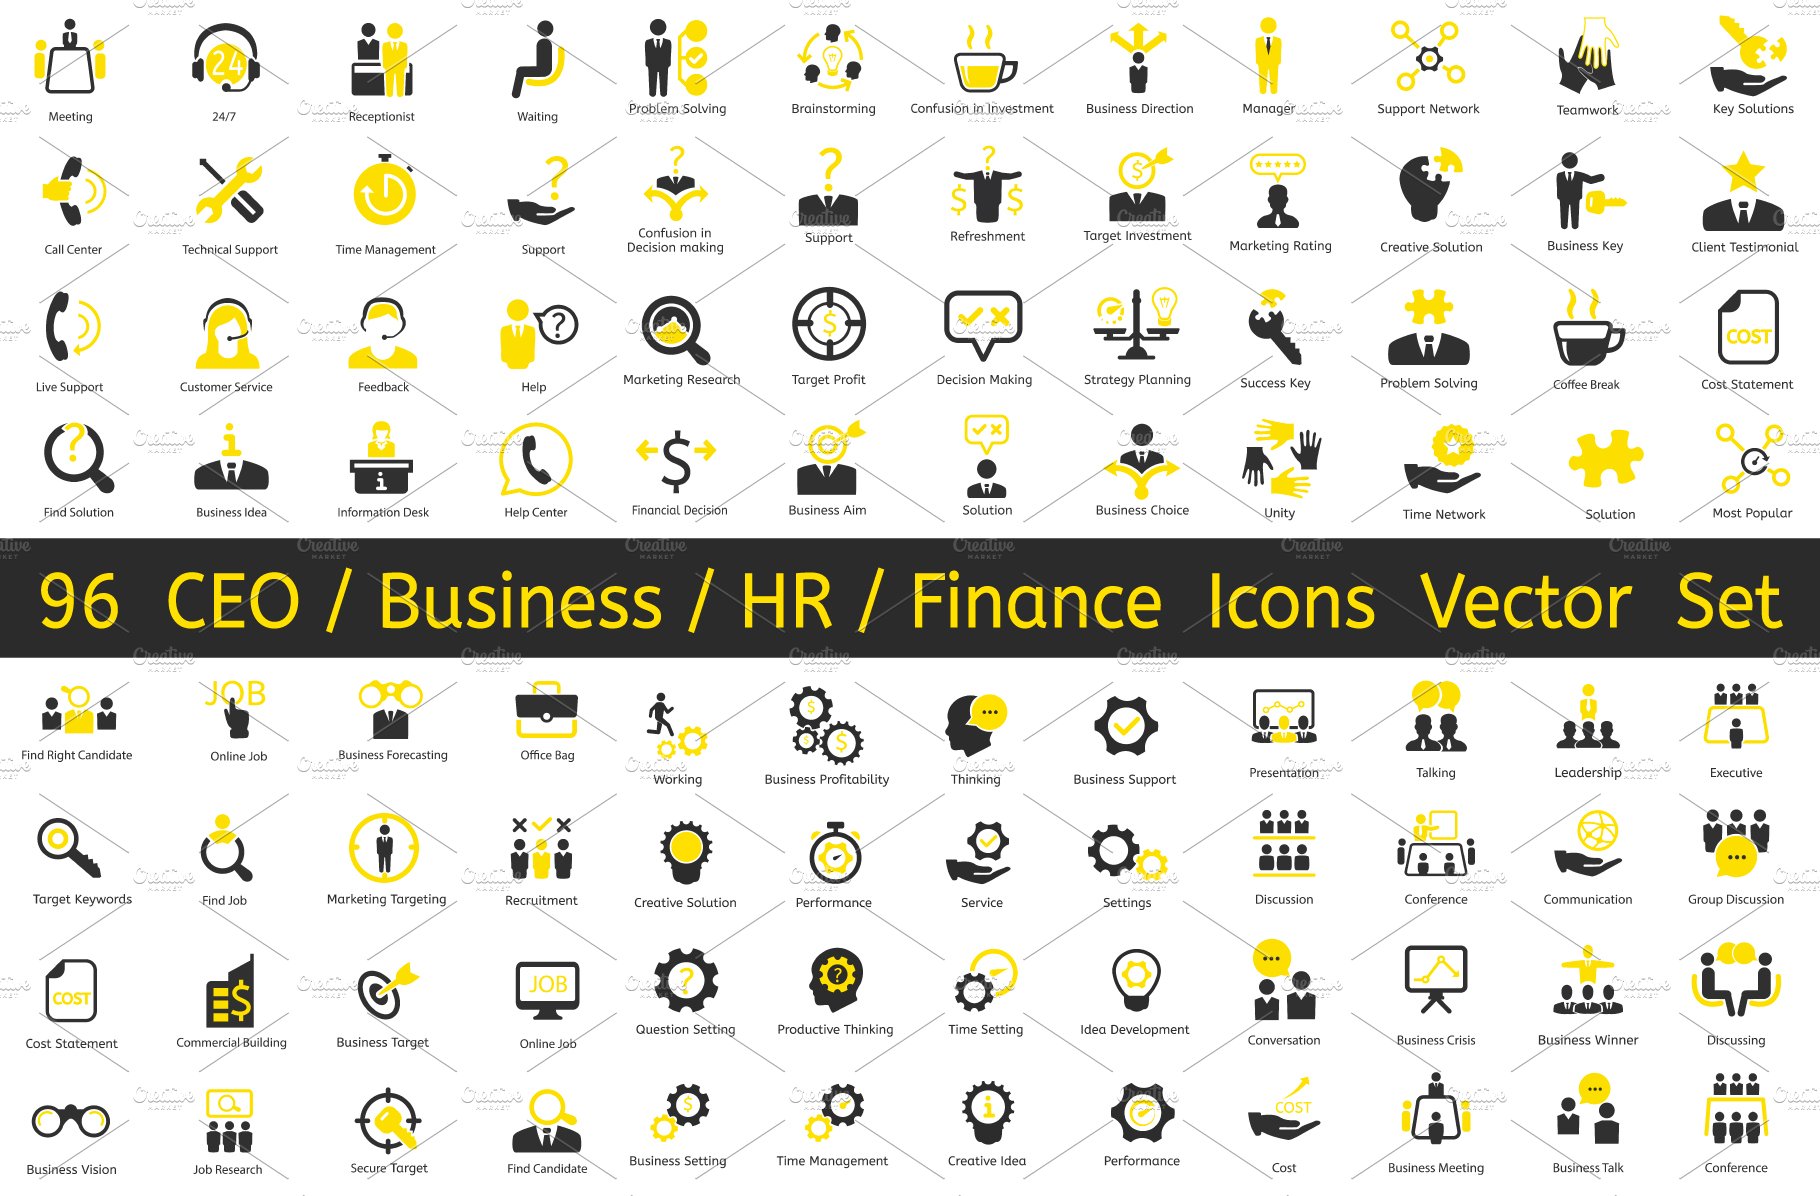 96 CEO / Business / HR vector icons cover image.